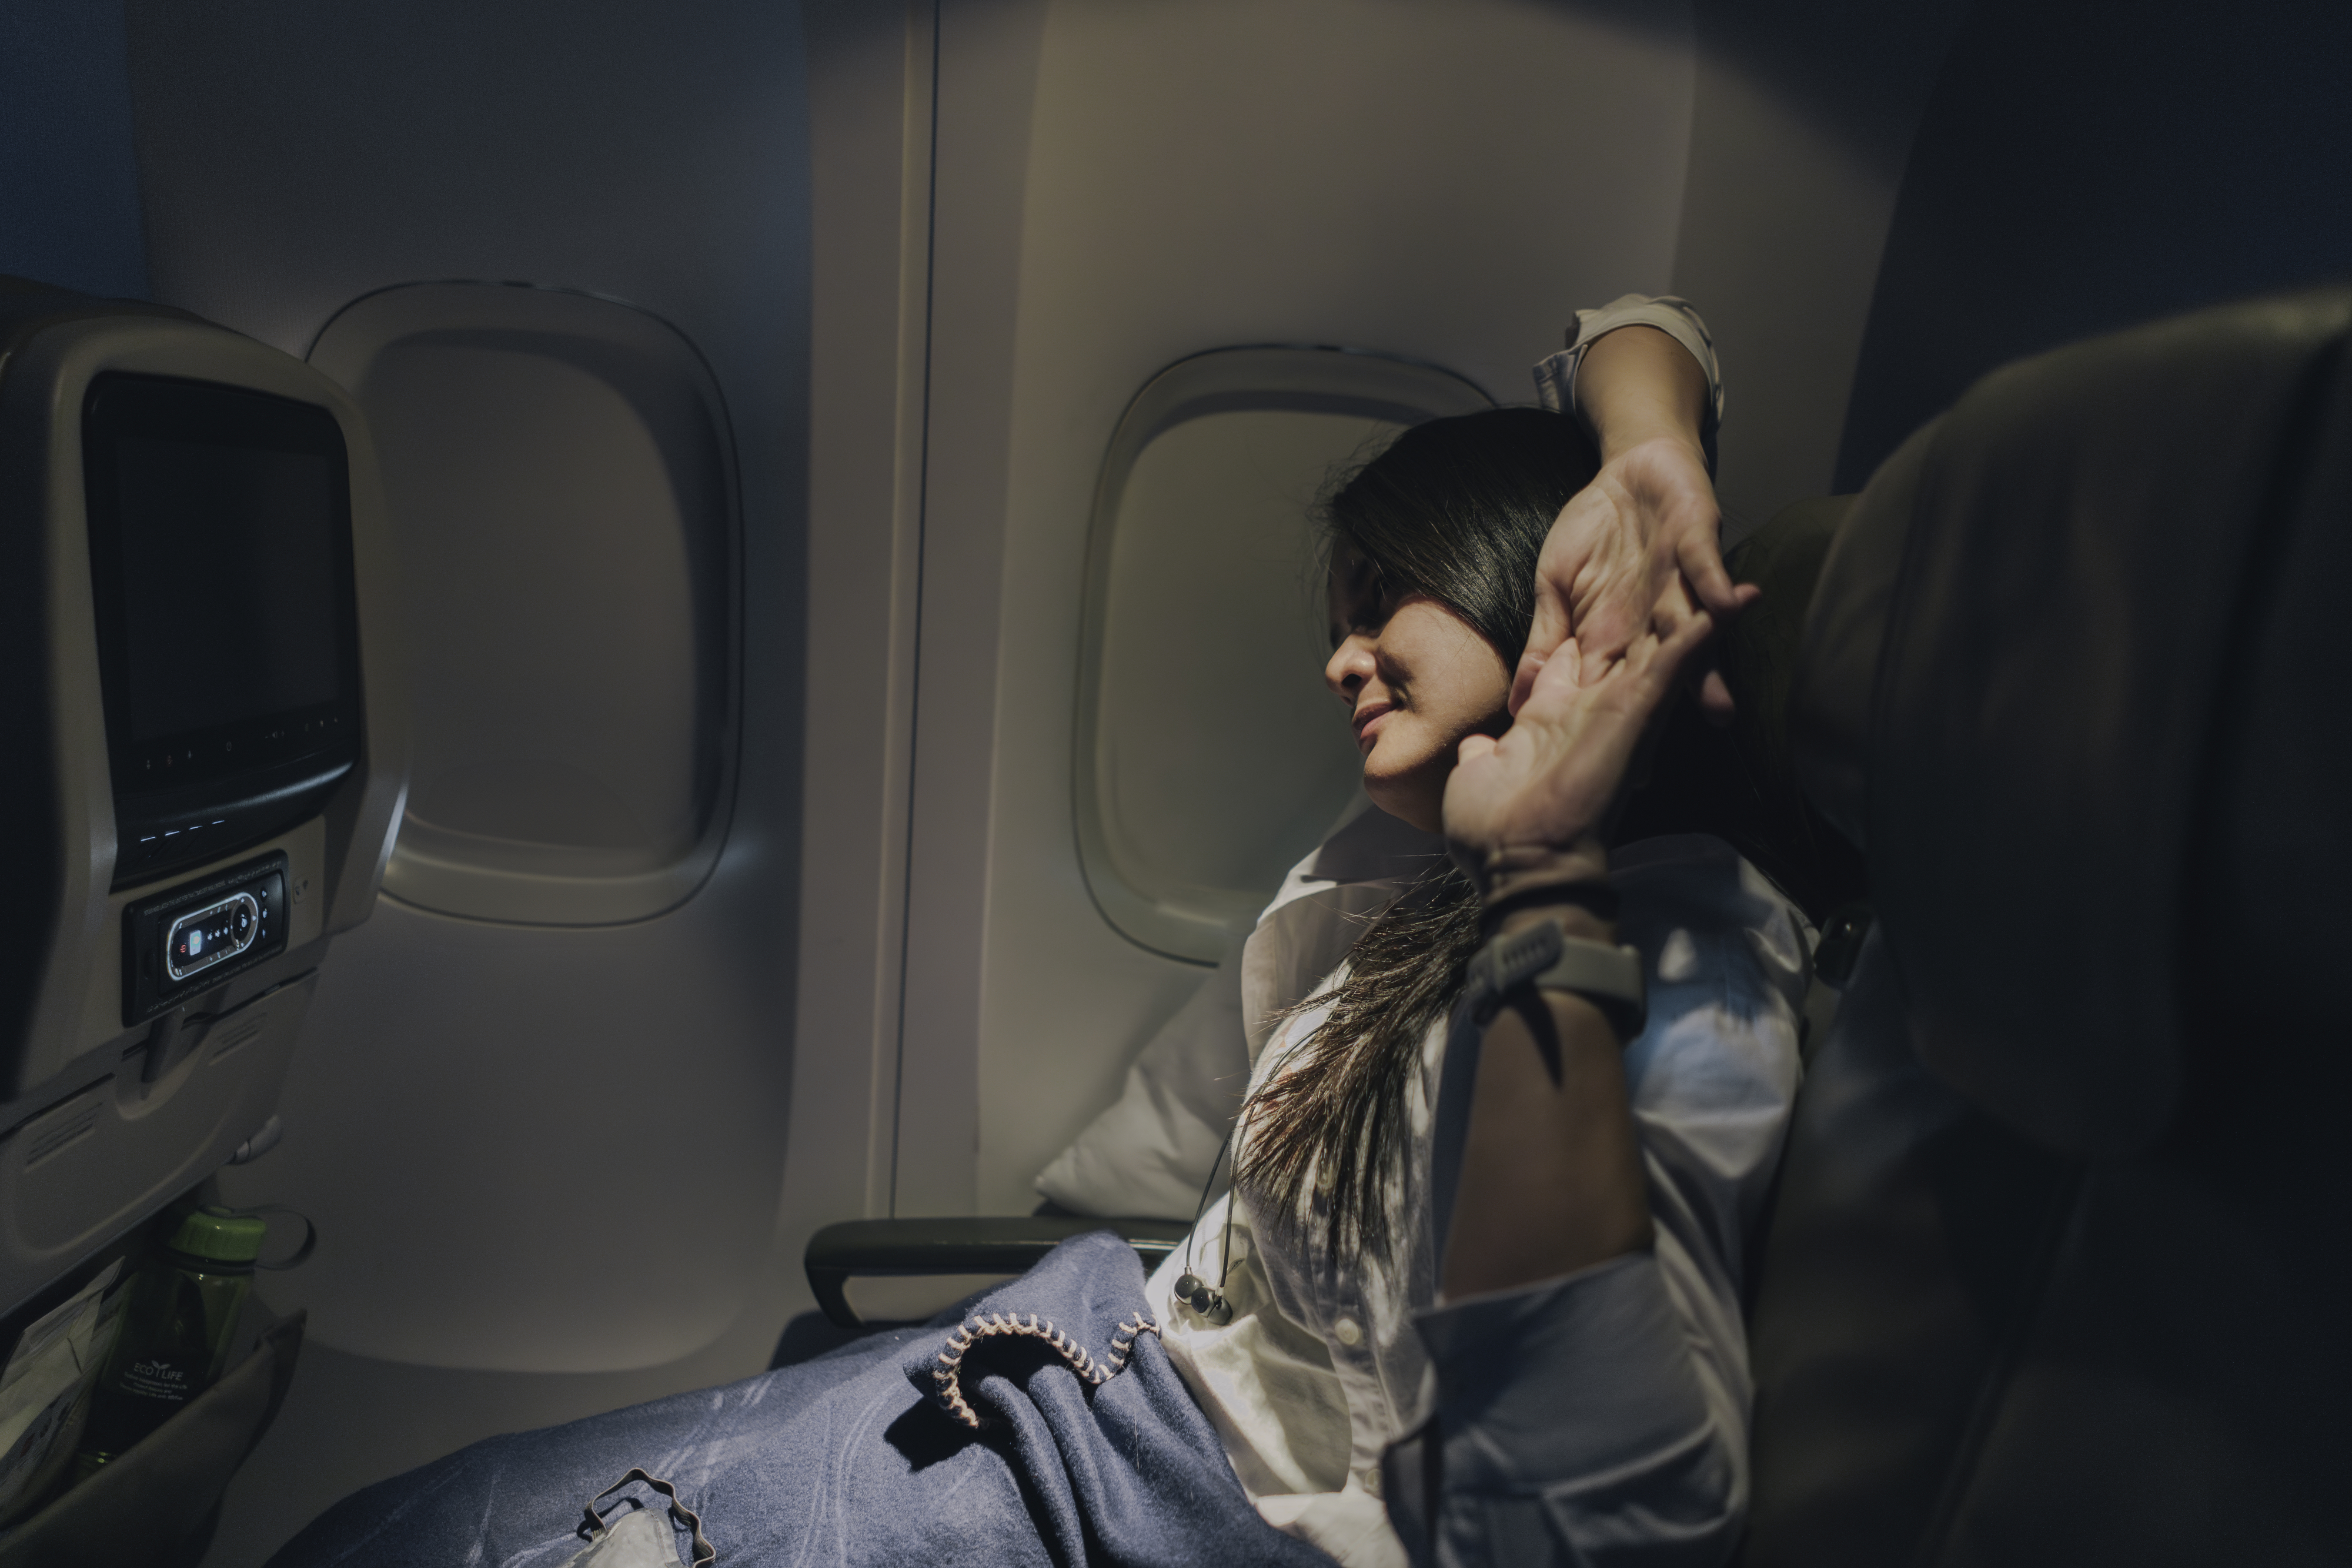 Person relaxing in an airplane seat, stretching arms with closed eyes, in-flight entertainment screen visible